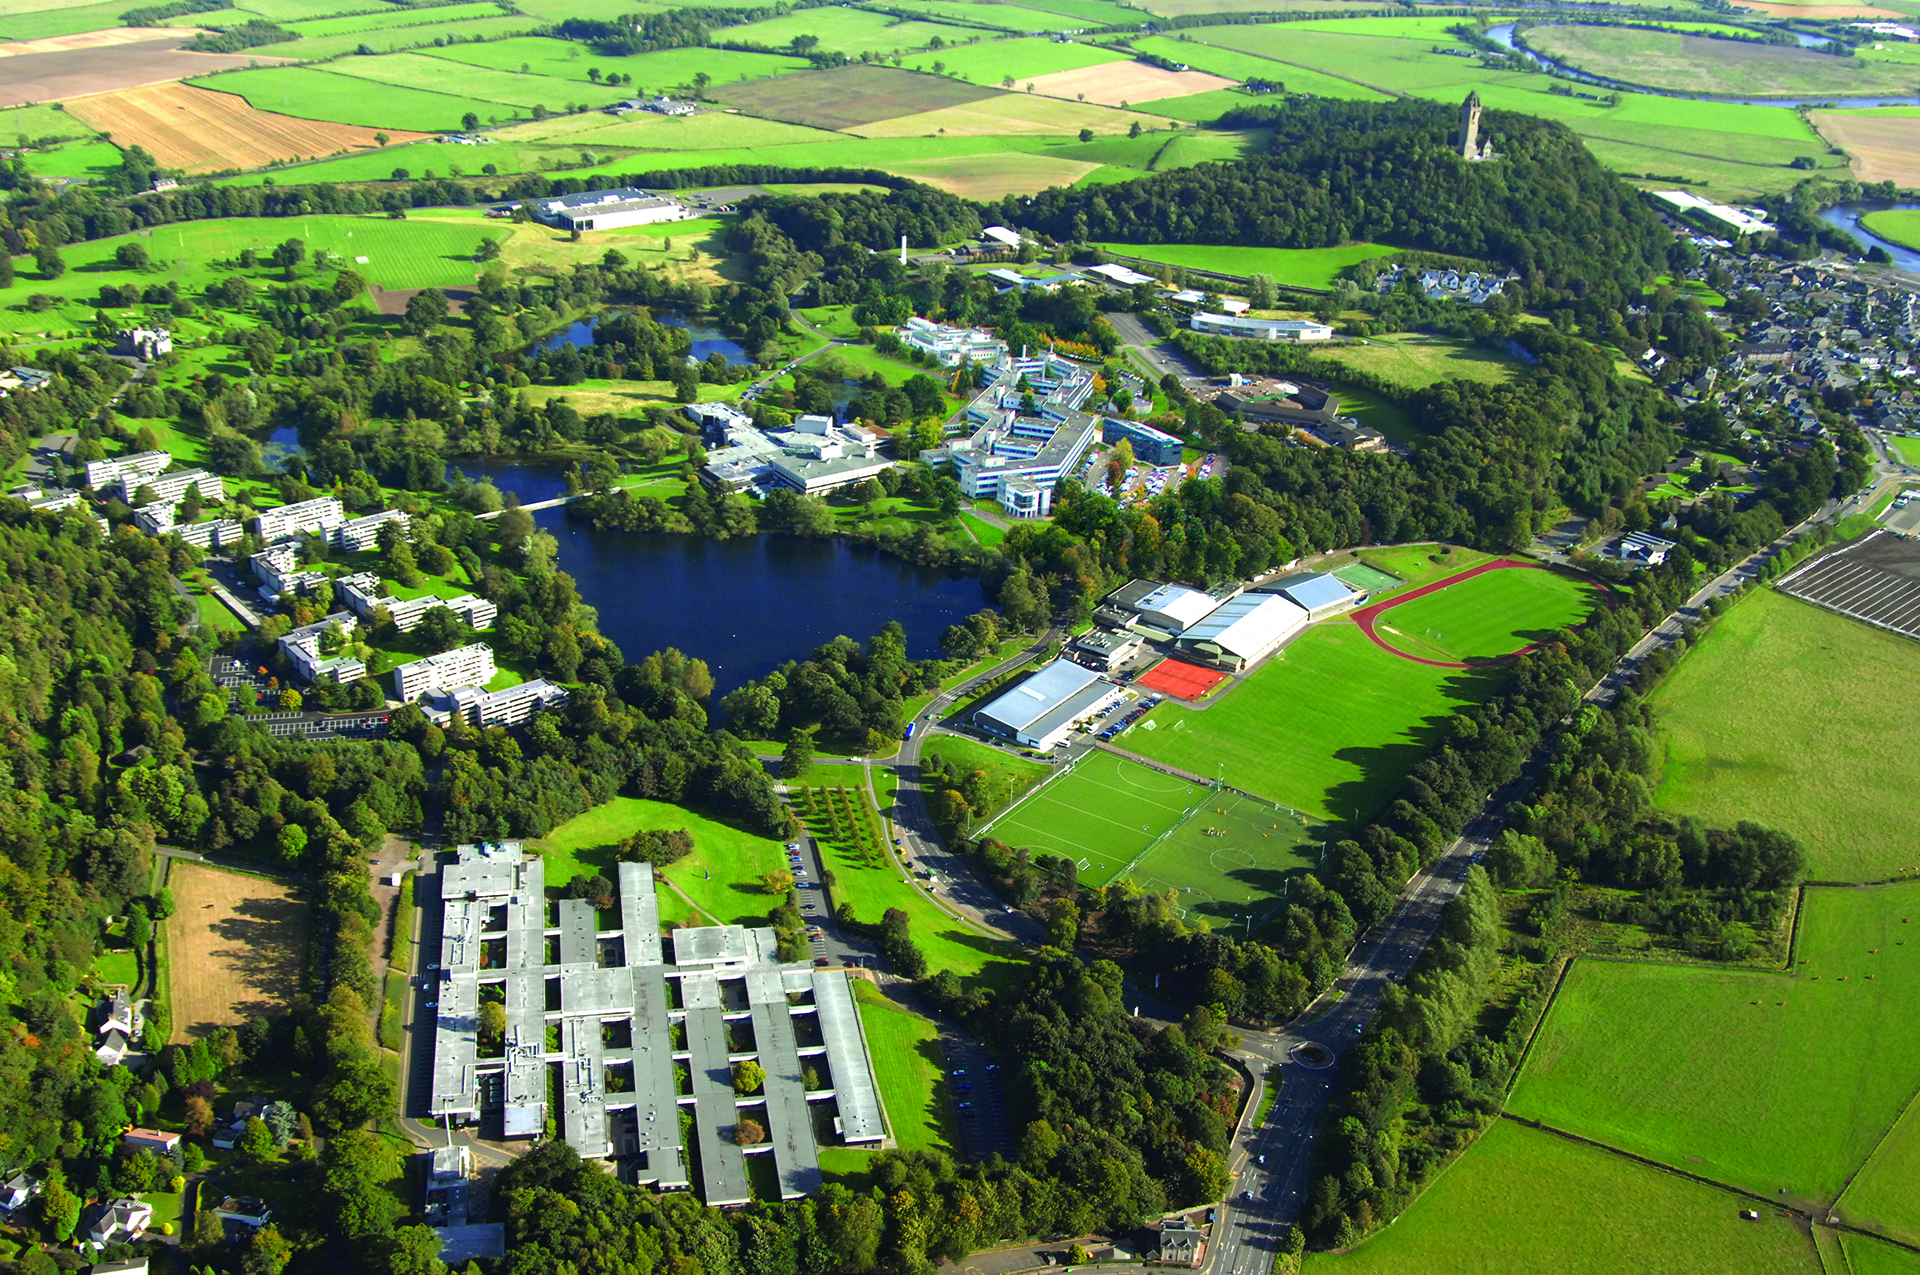 Aerial view of the University of Stirling campus